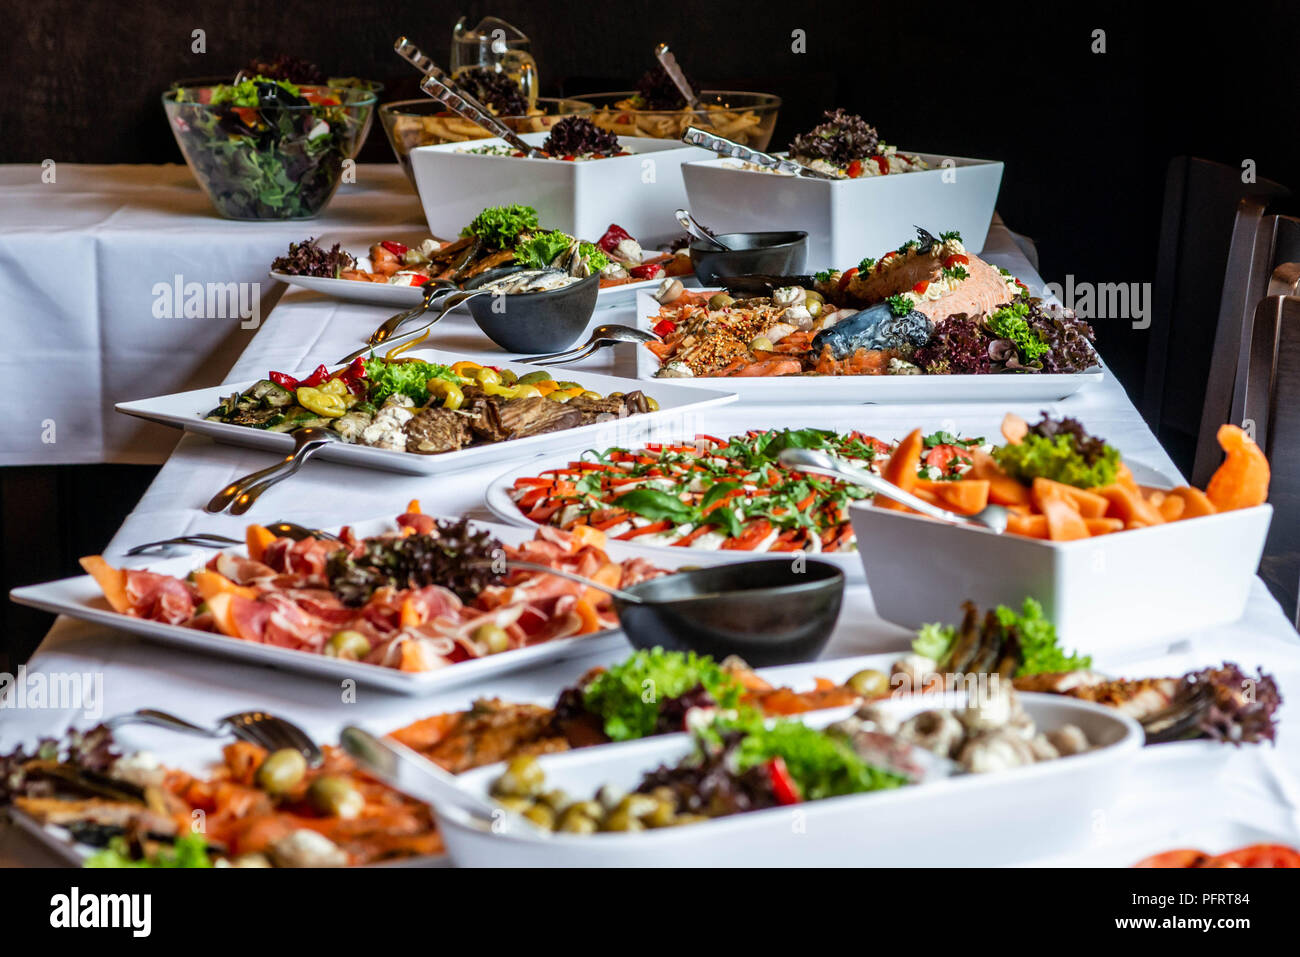 Party Brunch big Buffet table setting with Food Meat Vegetables Stock Photo  - Alamy